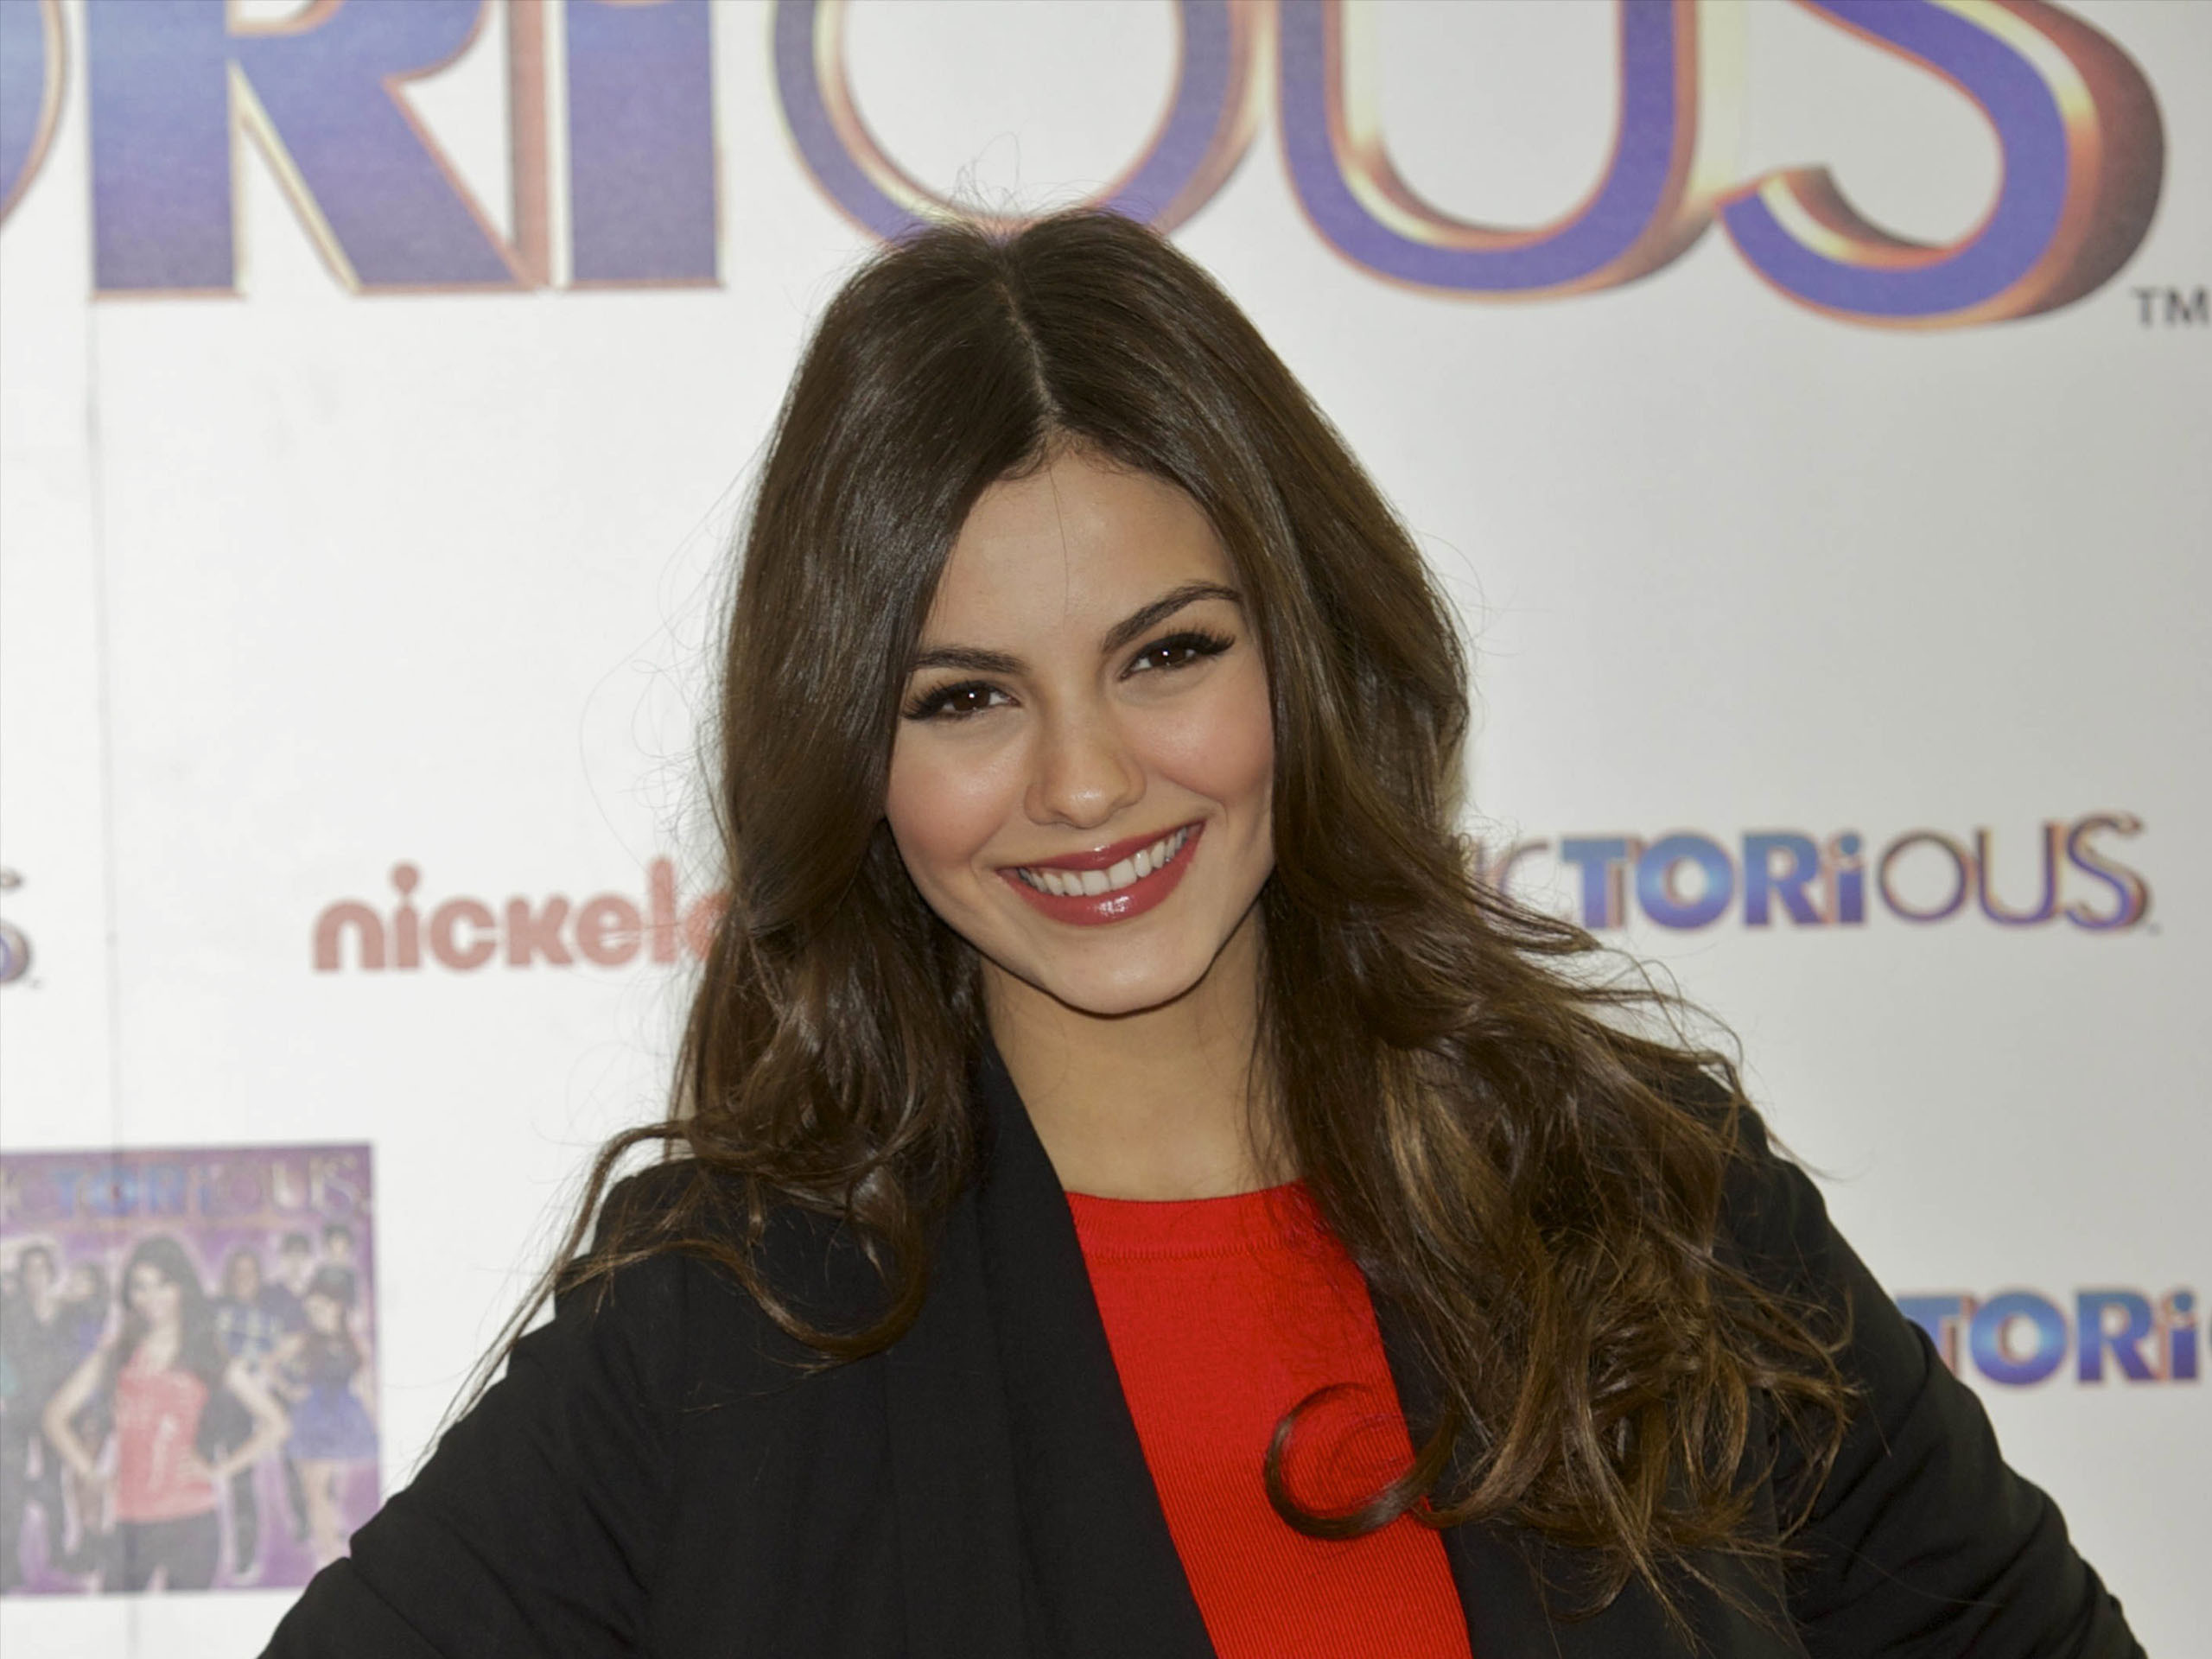 2560x1920 victoria justice wallpaper PIXYMOTION.com - Incredible Full HD pictures and  wallpapers .